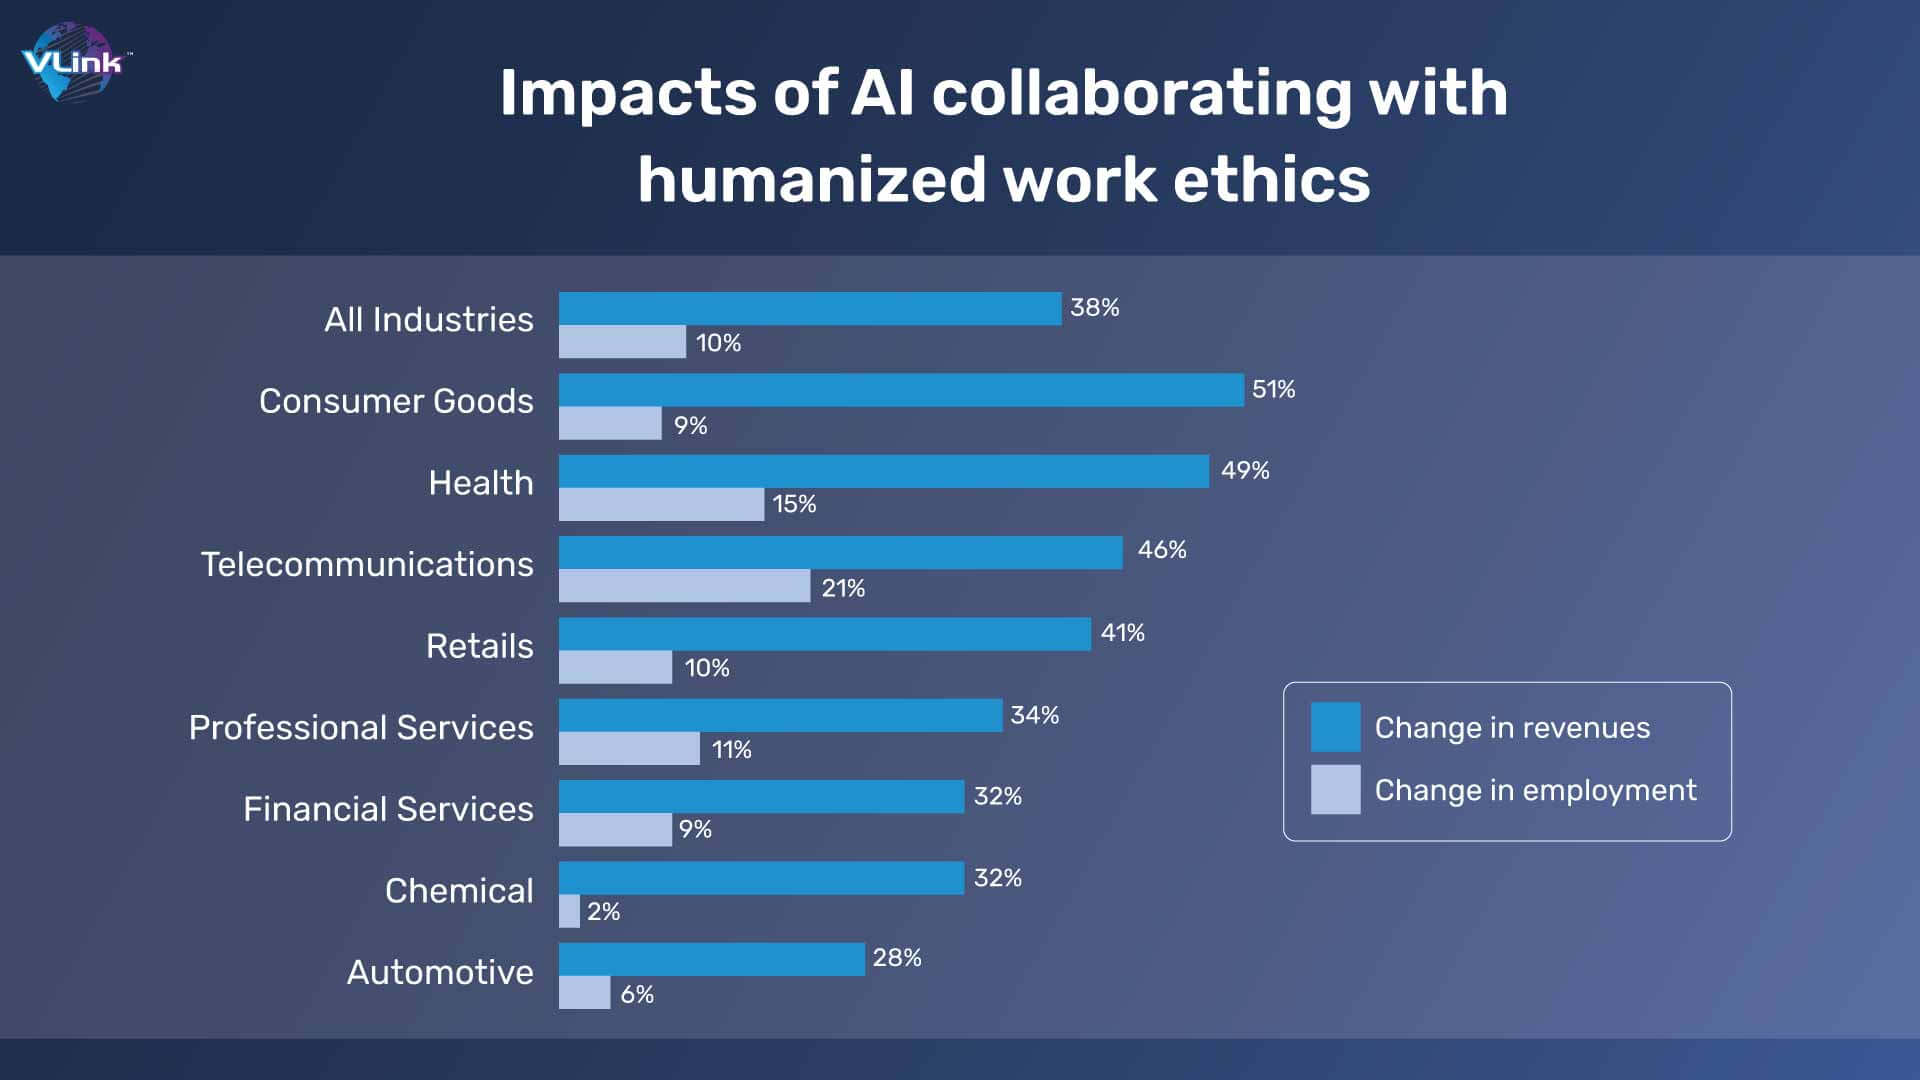  Impacts of AI collaborating with humanized work ethics